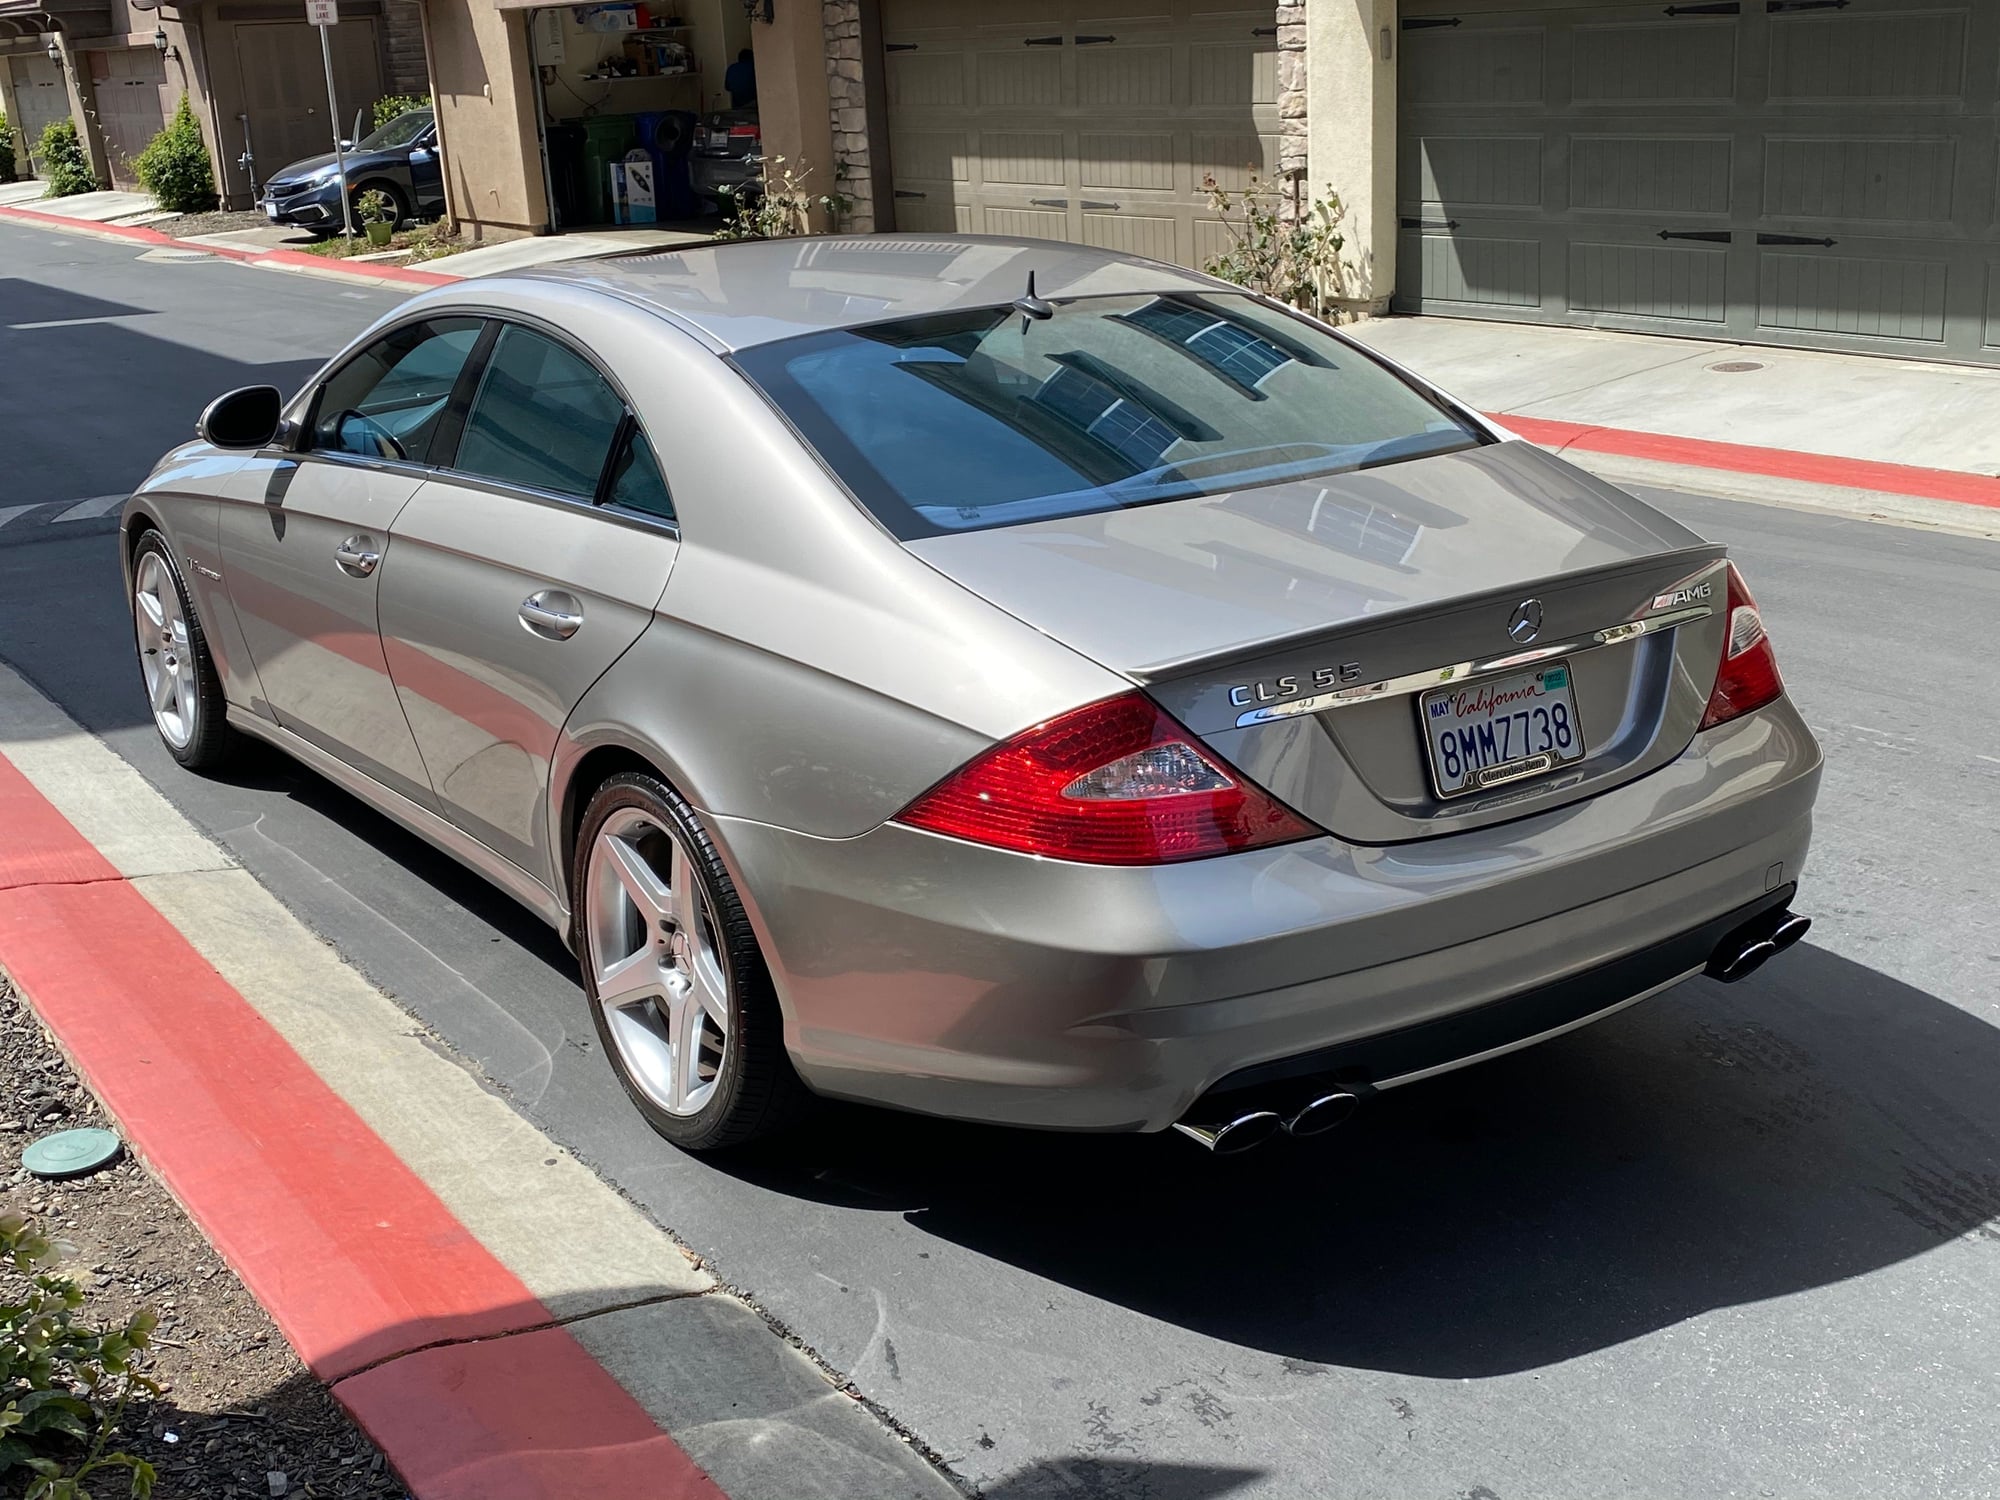 2006 Mercedes-Benz CLS55 AMG - 2006 Mercedes CLS55 sale feeler - Used - VIN WDDDJ76X96A023734 - 75,600 Miles - 8 cyl - Automatic - Fremont, CA 94555, United States